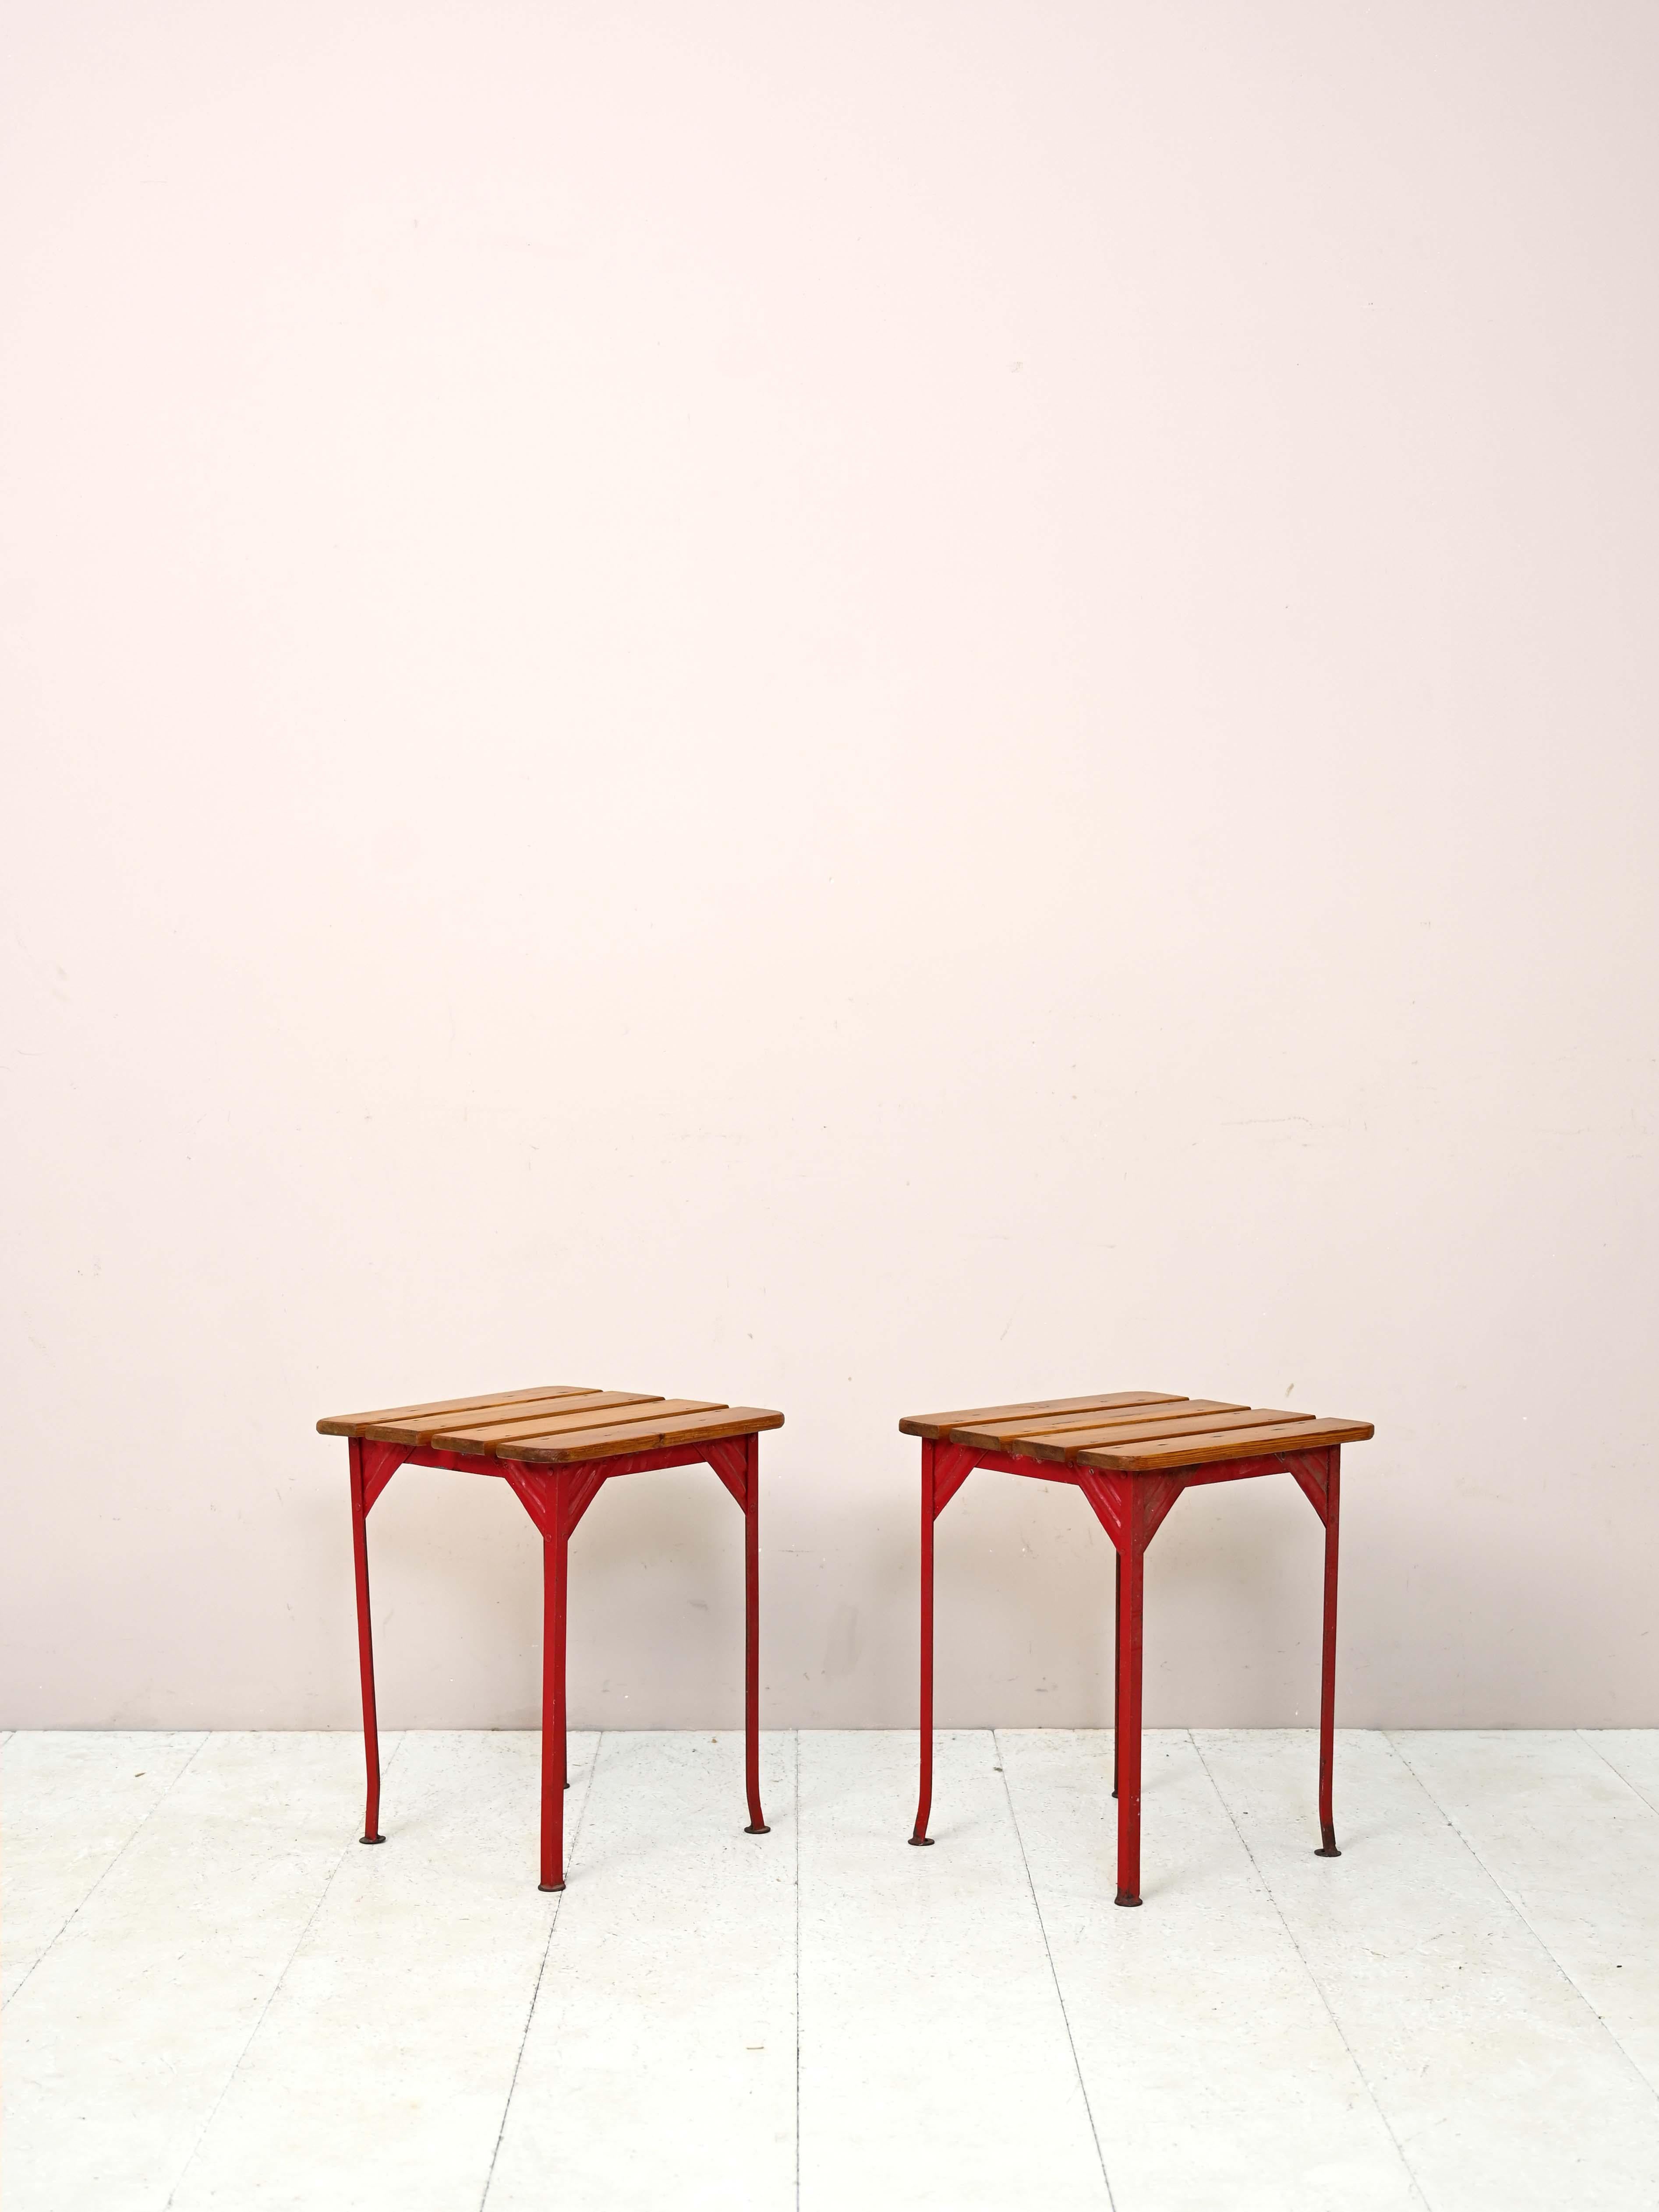 Scandinavian vintage stools.

Pair of industrial style stools with red-painted metal frame and wooden slat seat.
Also try them as side tables or as nightstands for eclectic style furniture. 

Good condition. Conservative restoration with natural